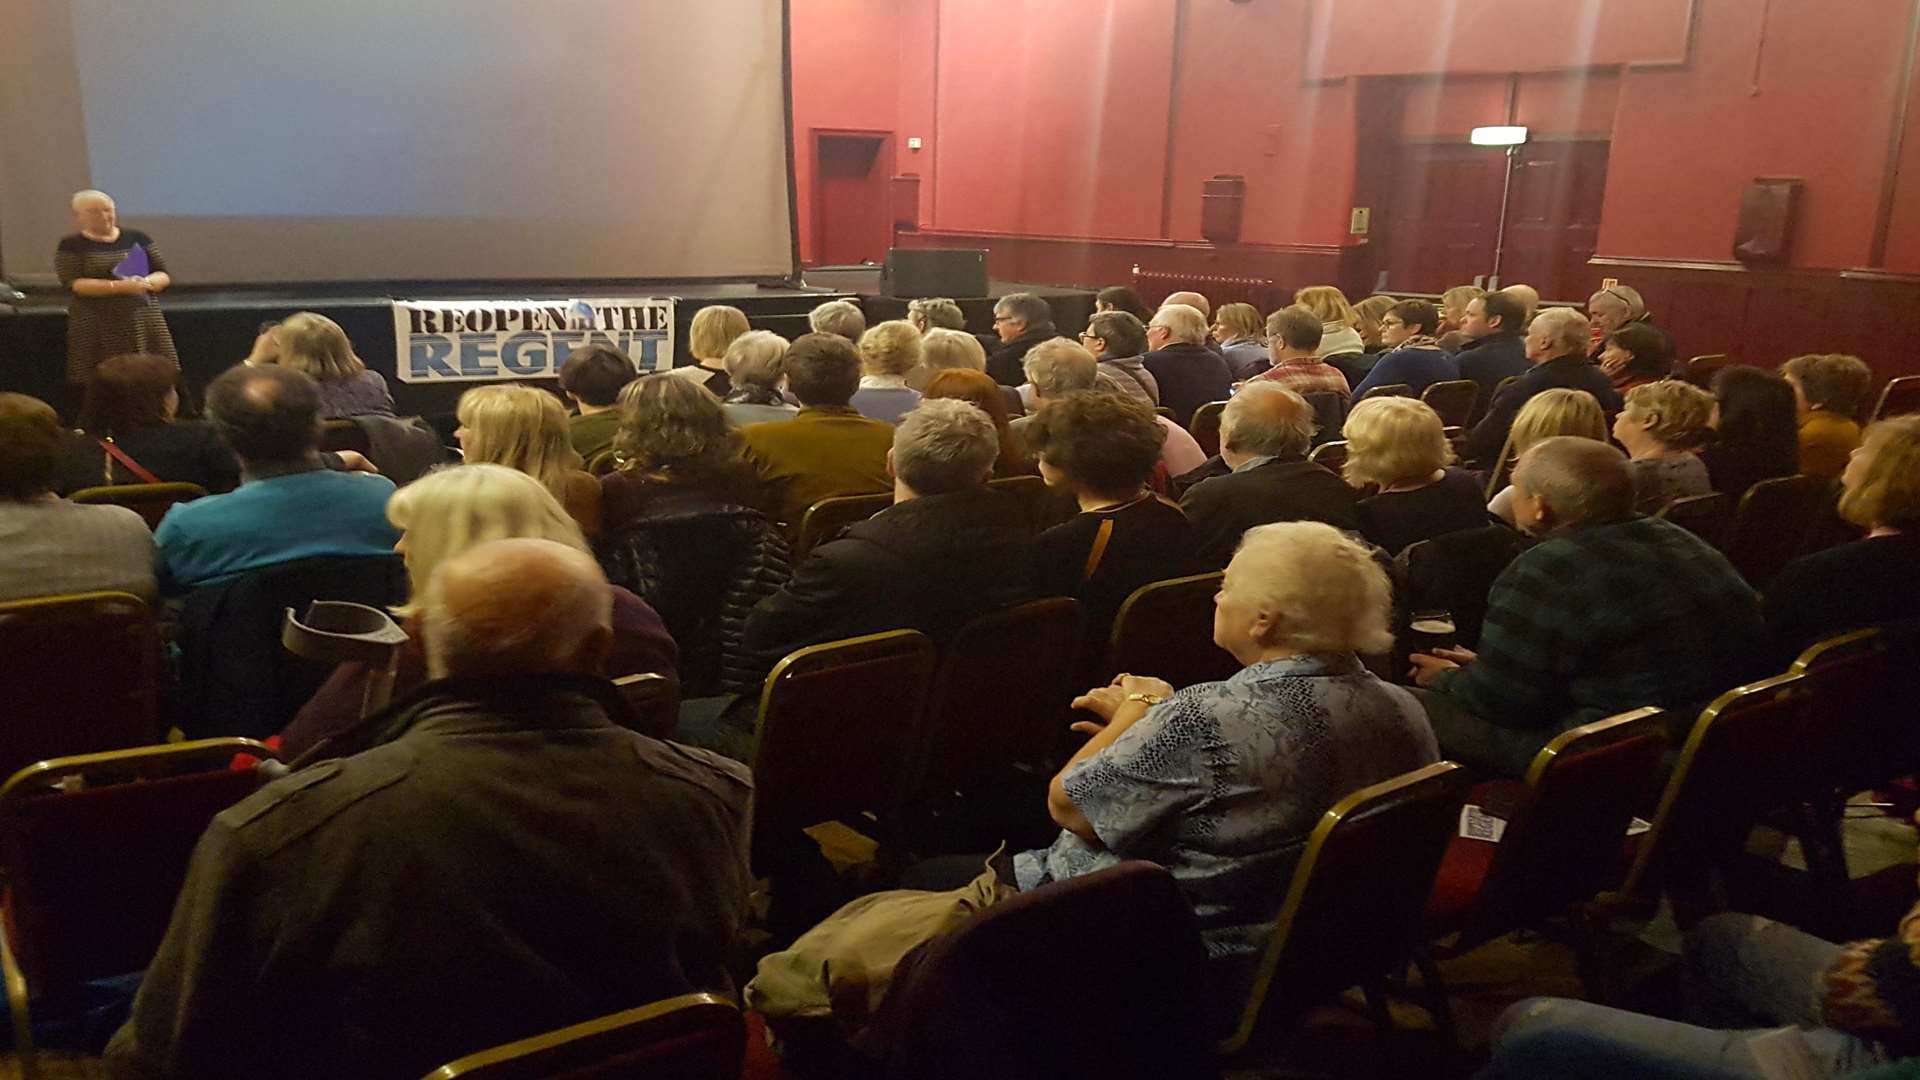 More than 100 supporters gathered at the Astor Theatre in Deal to hear the latest news from the Reopen the Regent campaign